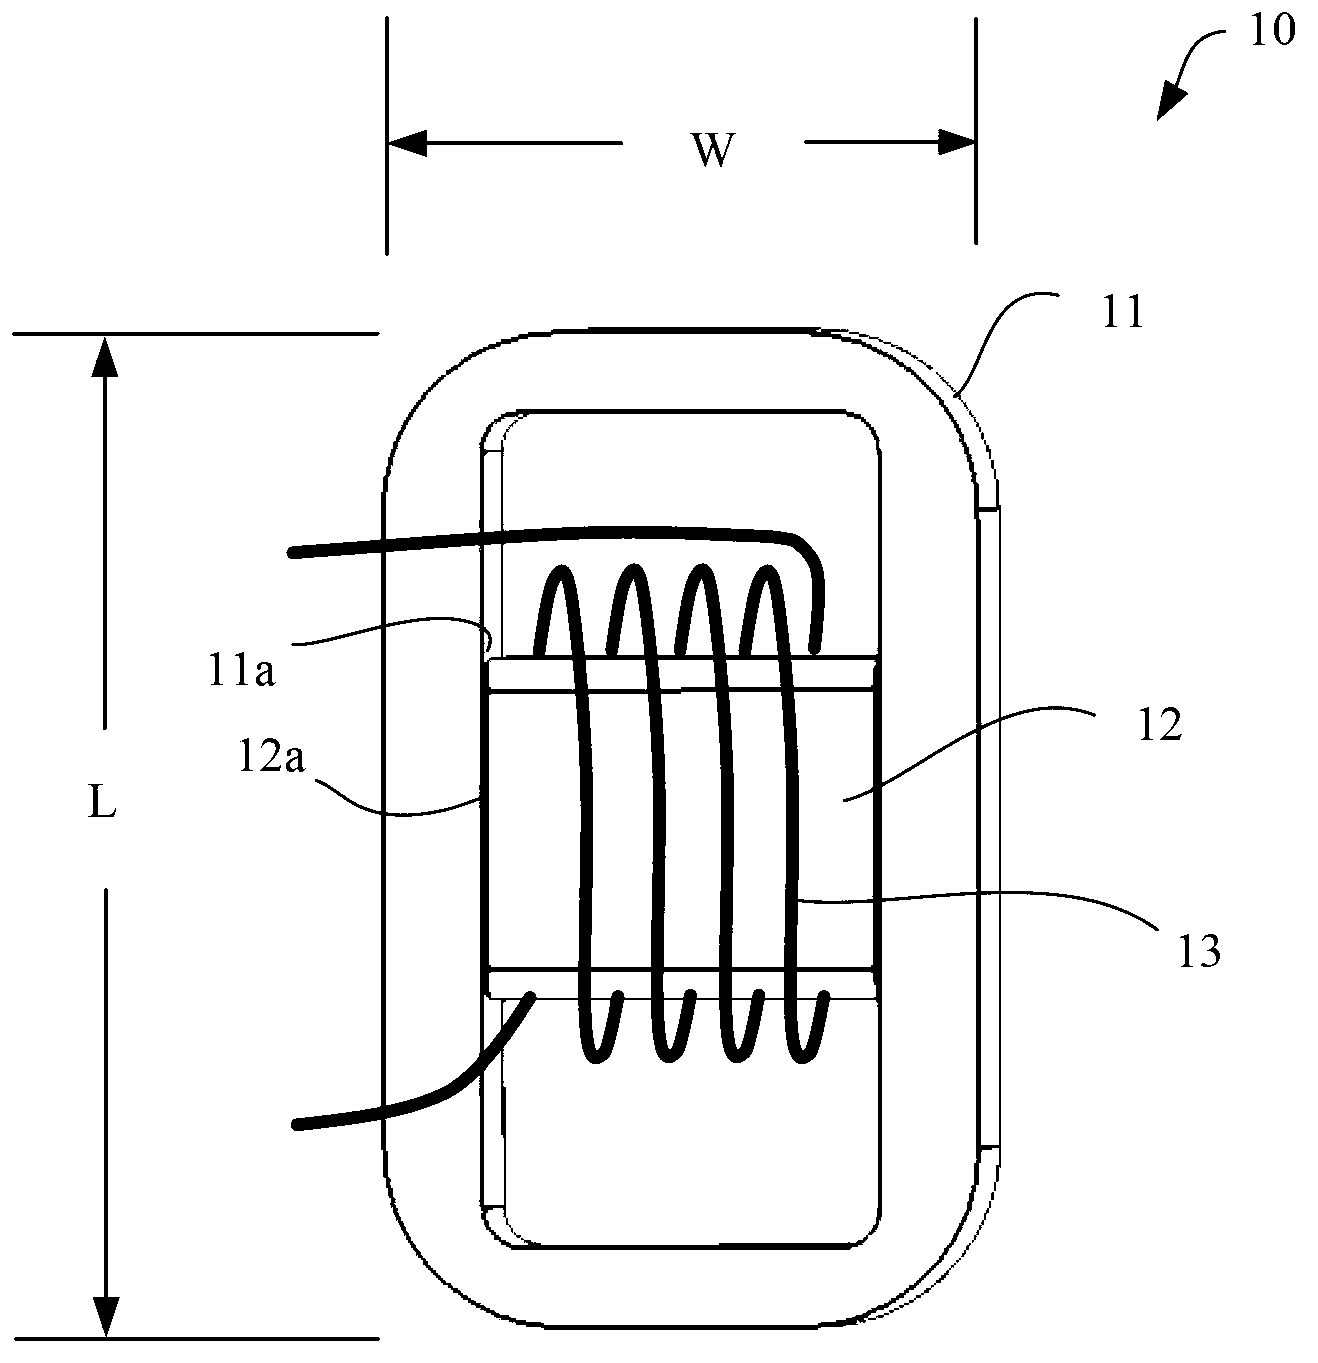 Mixed magnetic circuit inductor